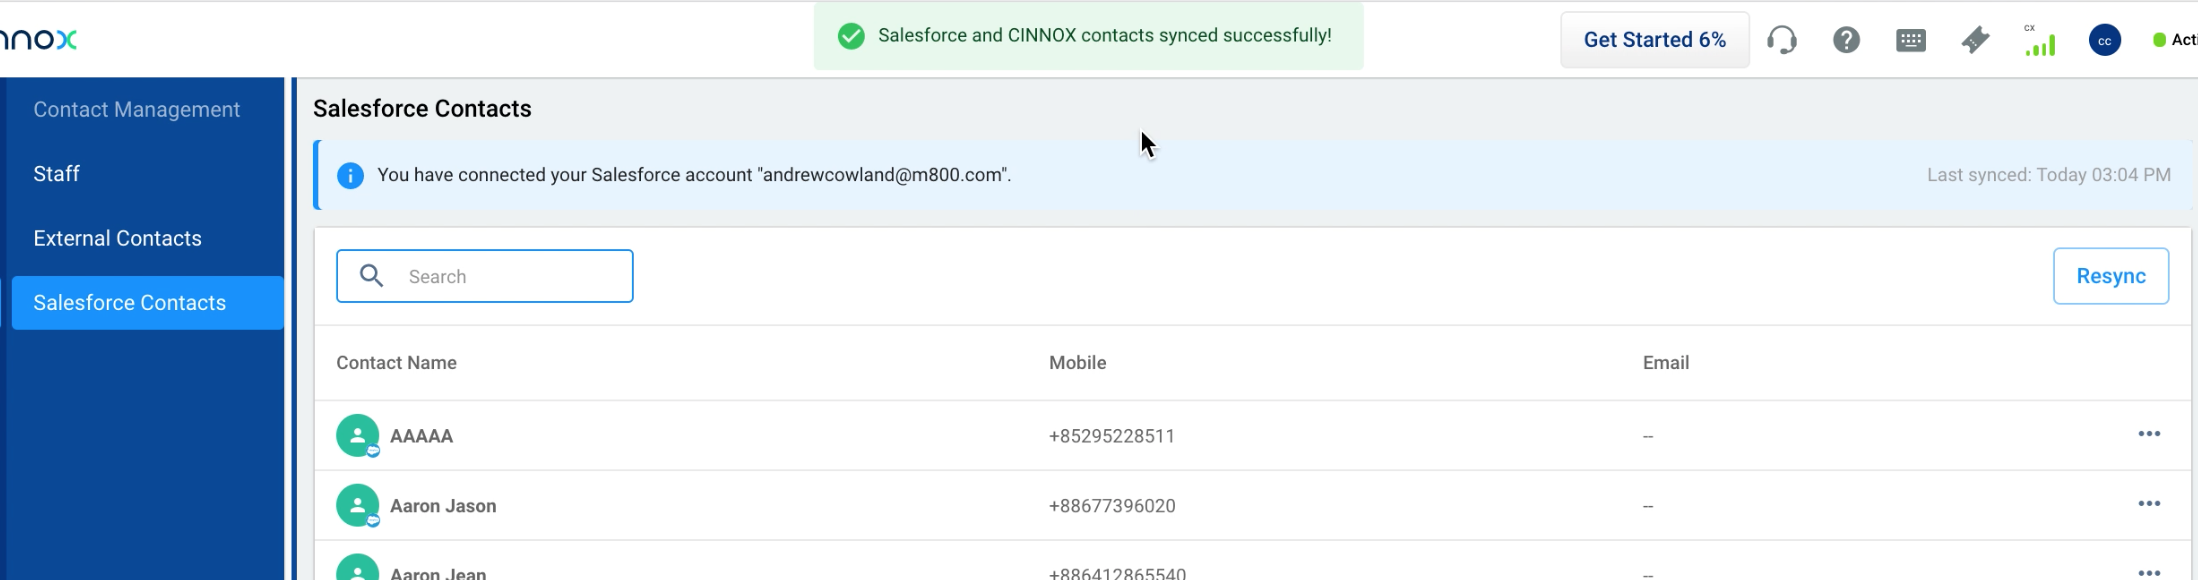 Contact Sync Successful